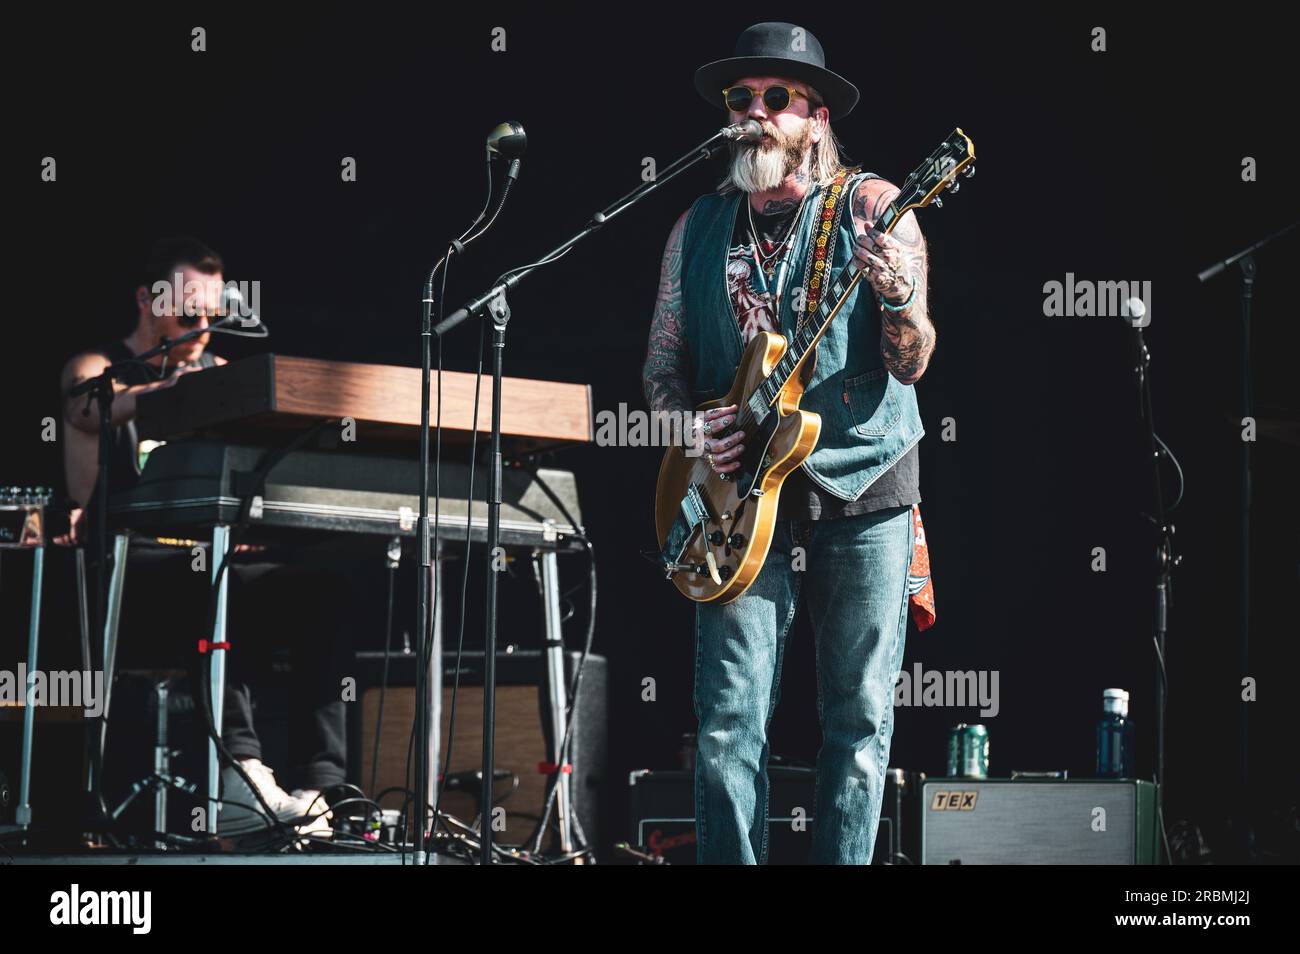 MADRID, MAD COOL FESTIVAL 2023, SPAIN:  The Canadian musician, singer, songwriter and record producer City and Colour (real name Dallas Green), performing live on stage at the Mad Cool Festival 2023. Stock Photo